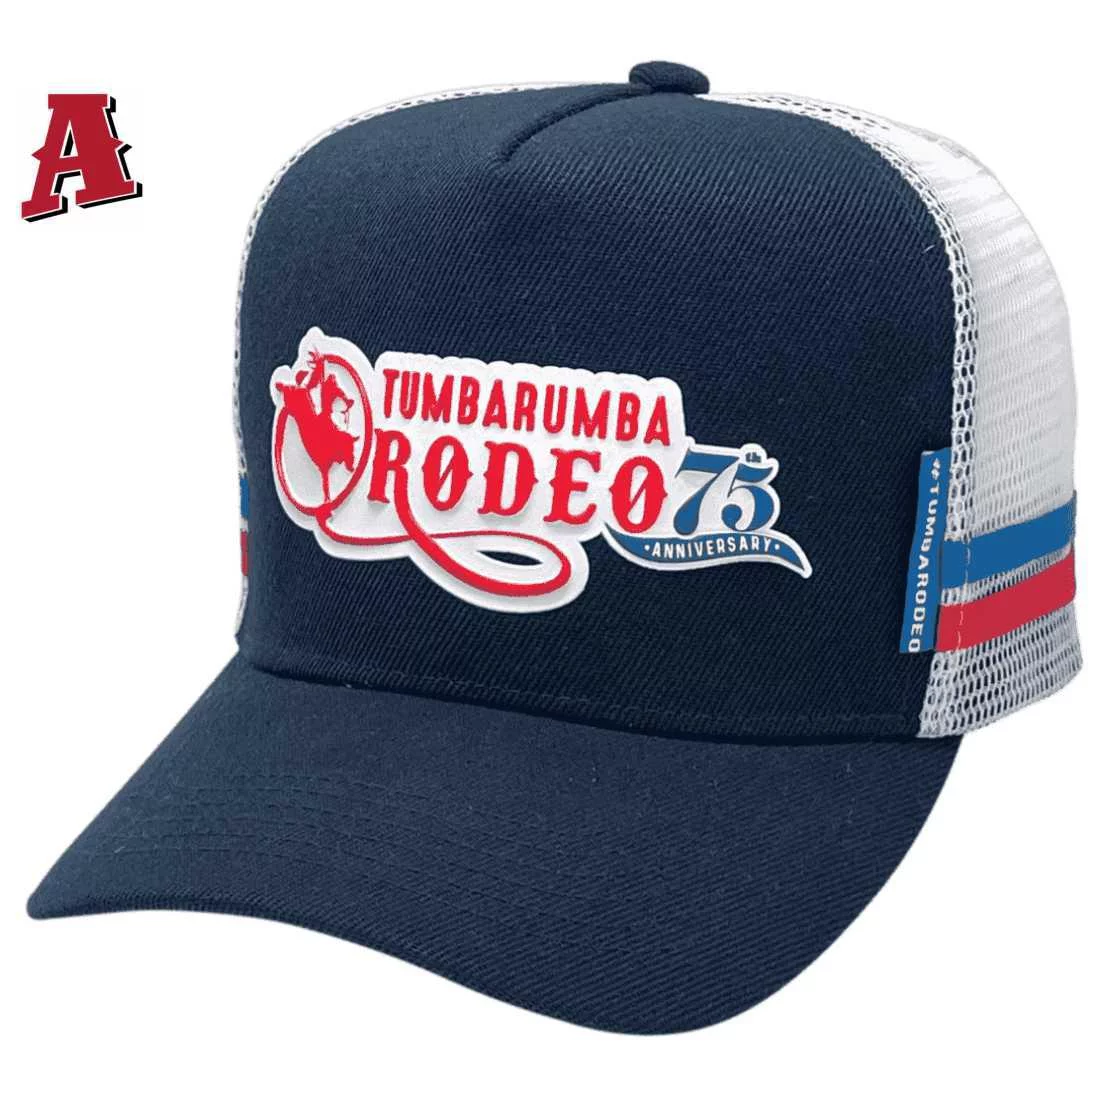 Tumbarumba Rodeo Tumbarumba NSW Midrange Aussie Trucker Hat with Australian Head Fit Crown and Double Side Bands Navy White Blue Red